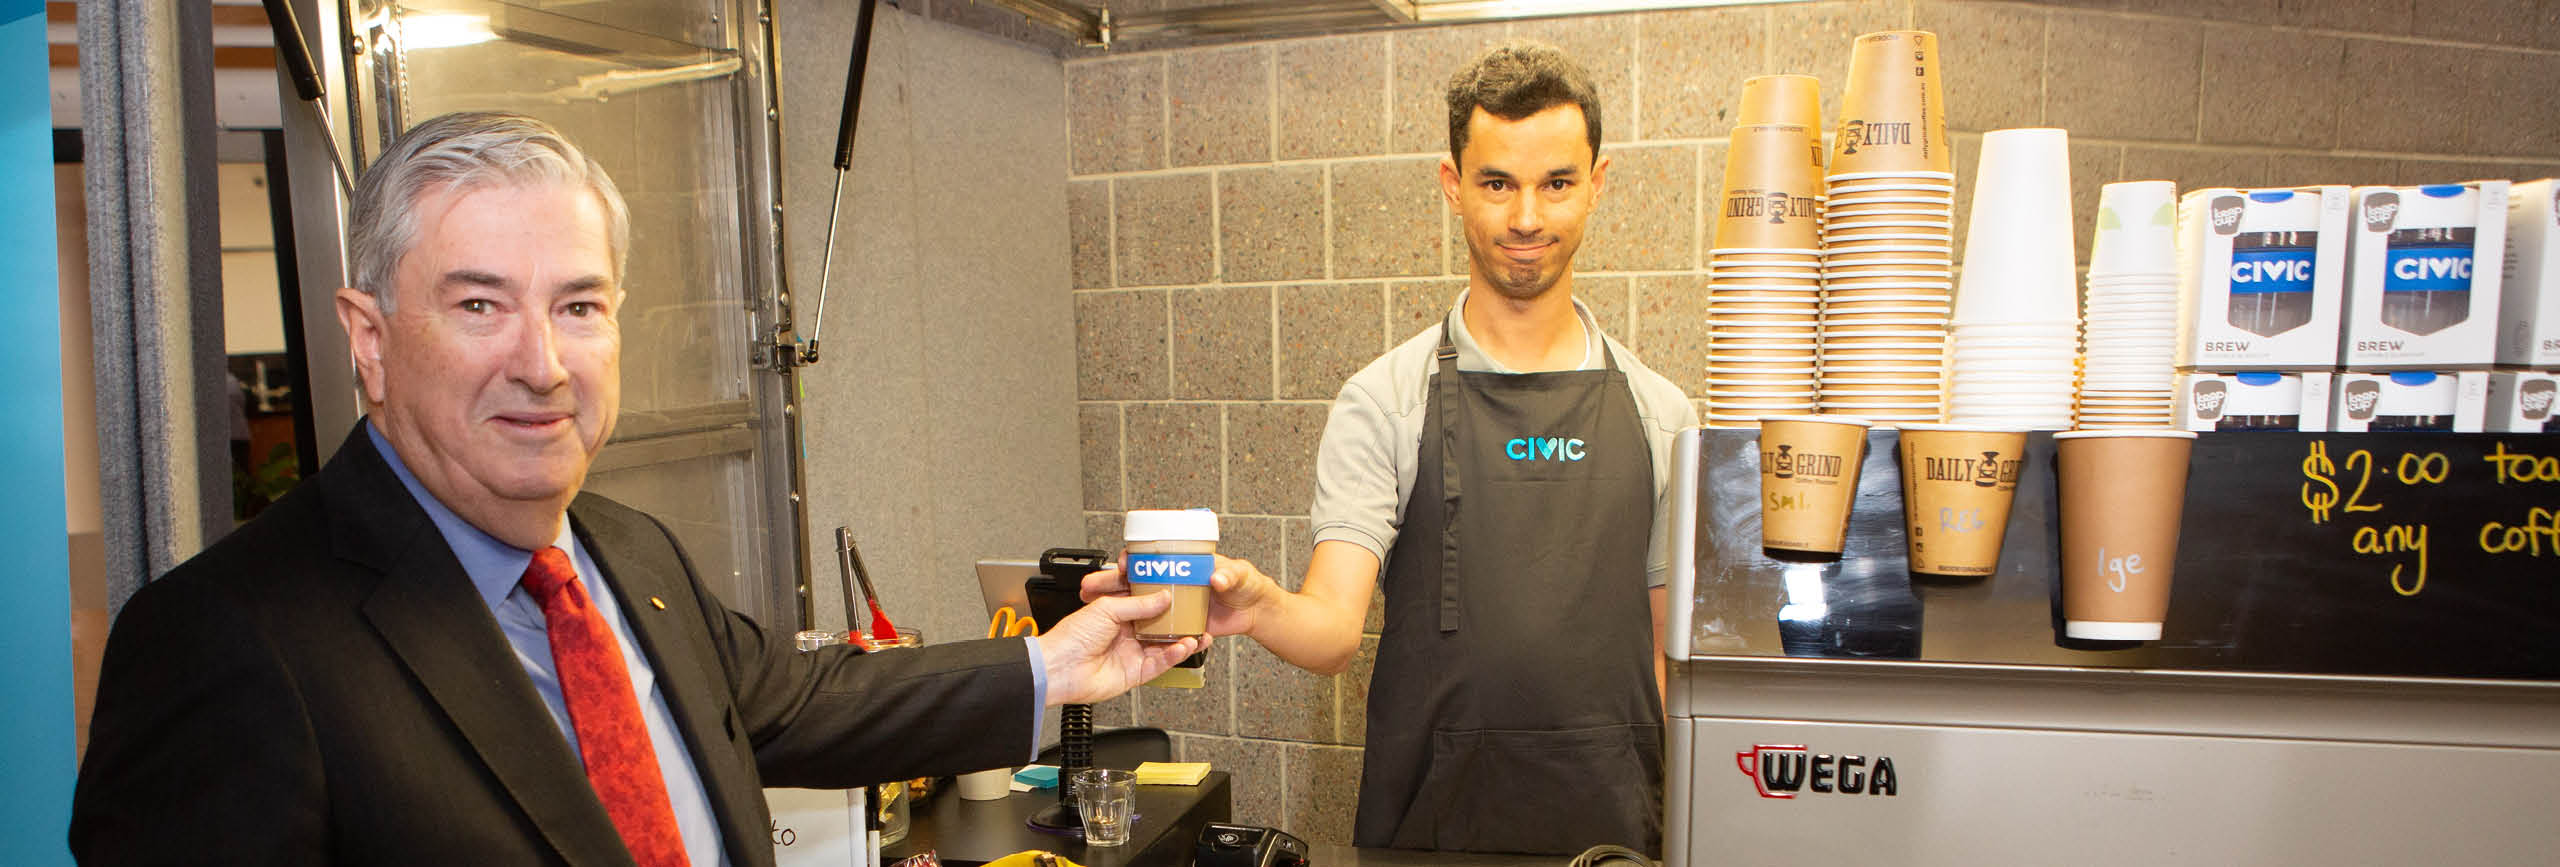 Penrith Mayor Ross Fowler receives his coffee from Martin at the Civic Disability Services coffee cart within Penrith Civic Centre